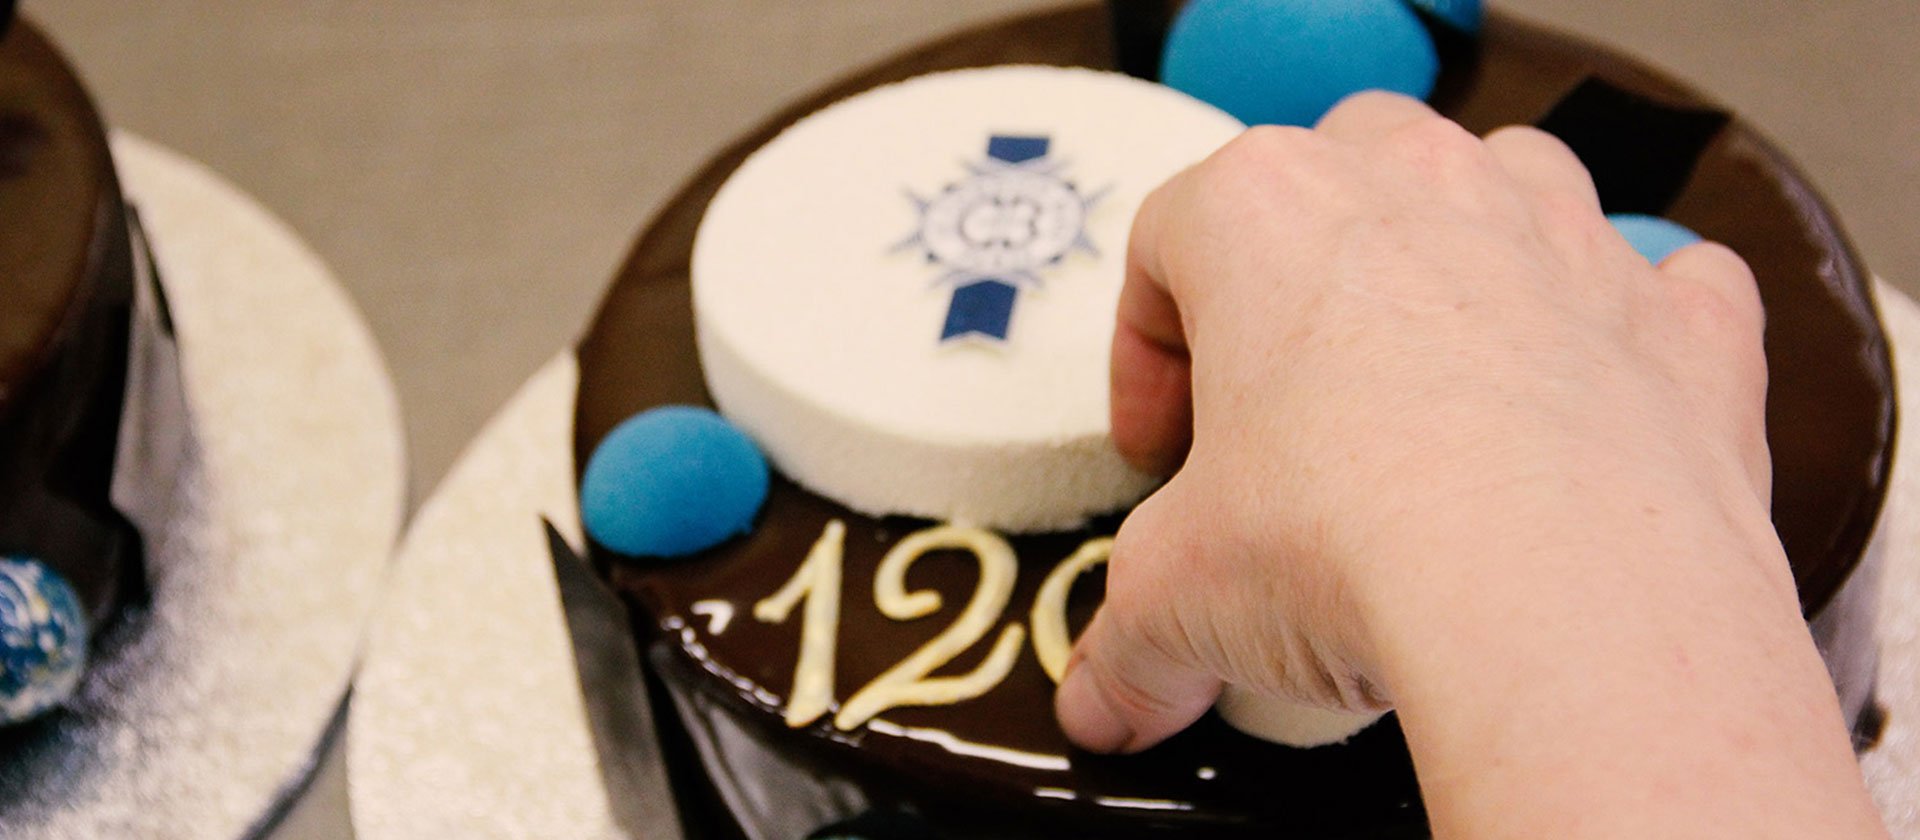 120th birthday cakes by Adelaide Chef and students